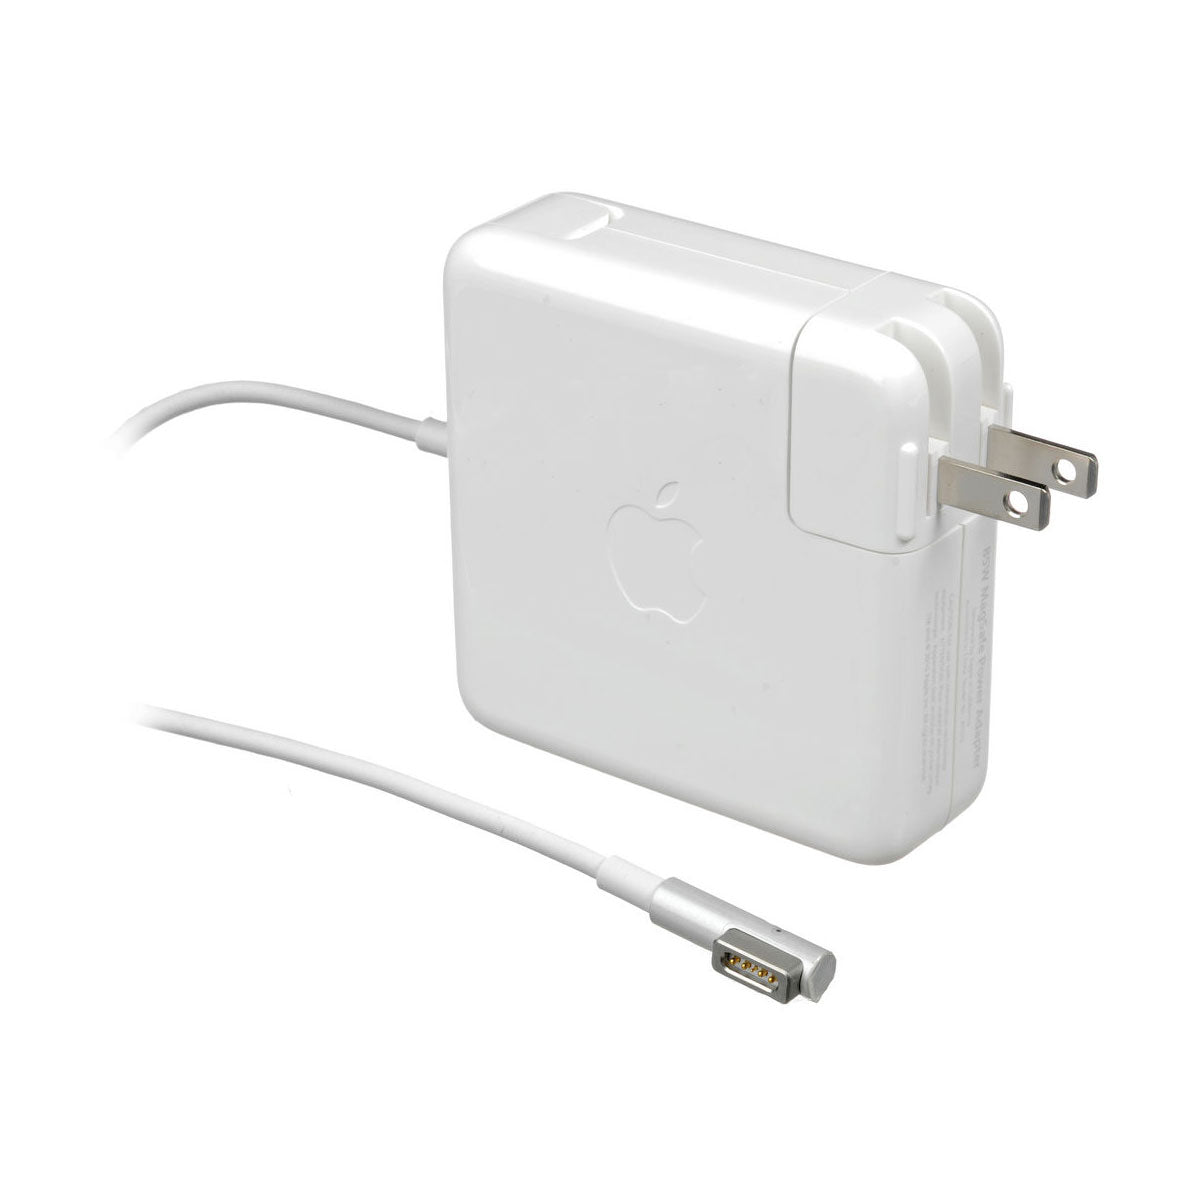 New in sealed box -- Apple MagSafe Charger for iPhone